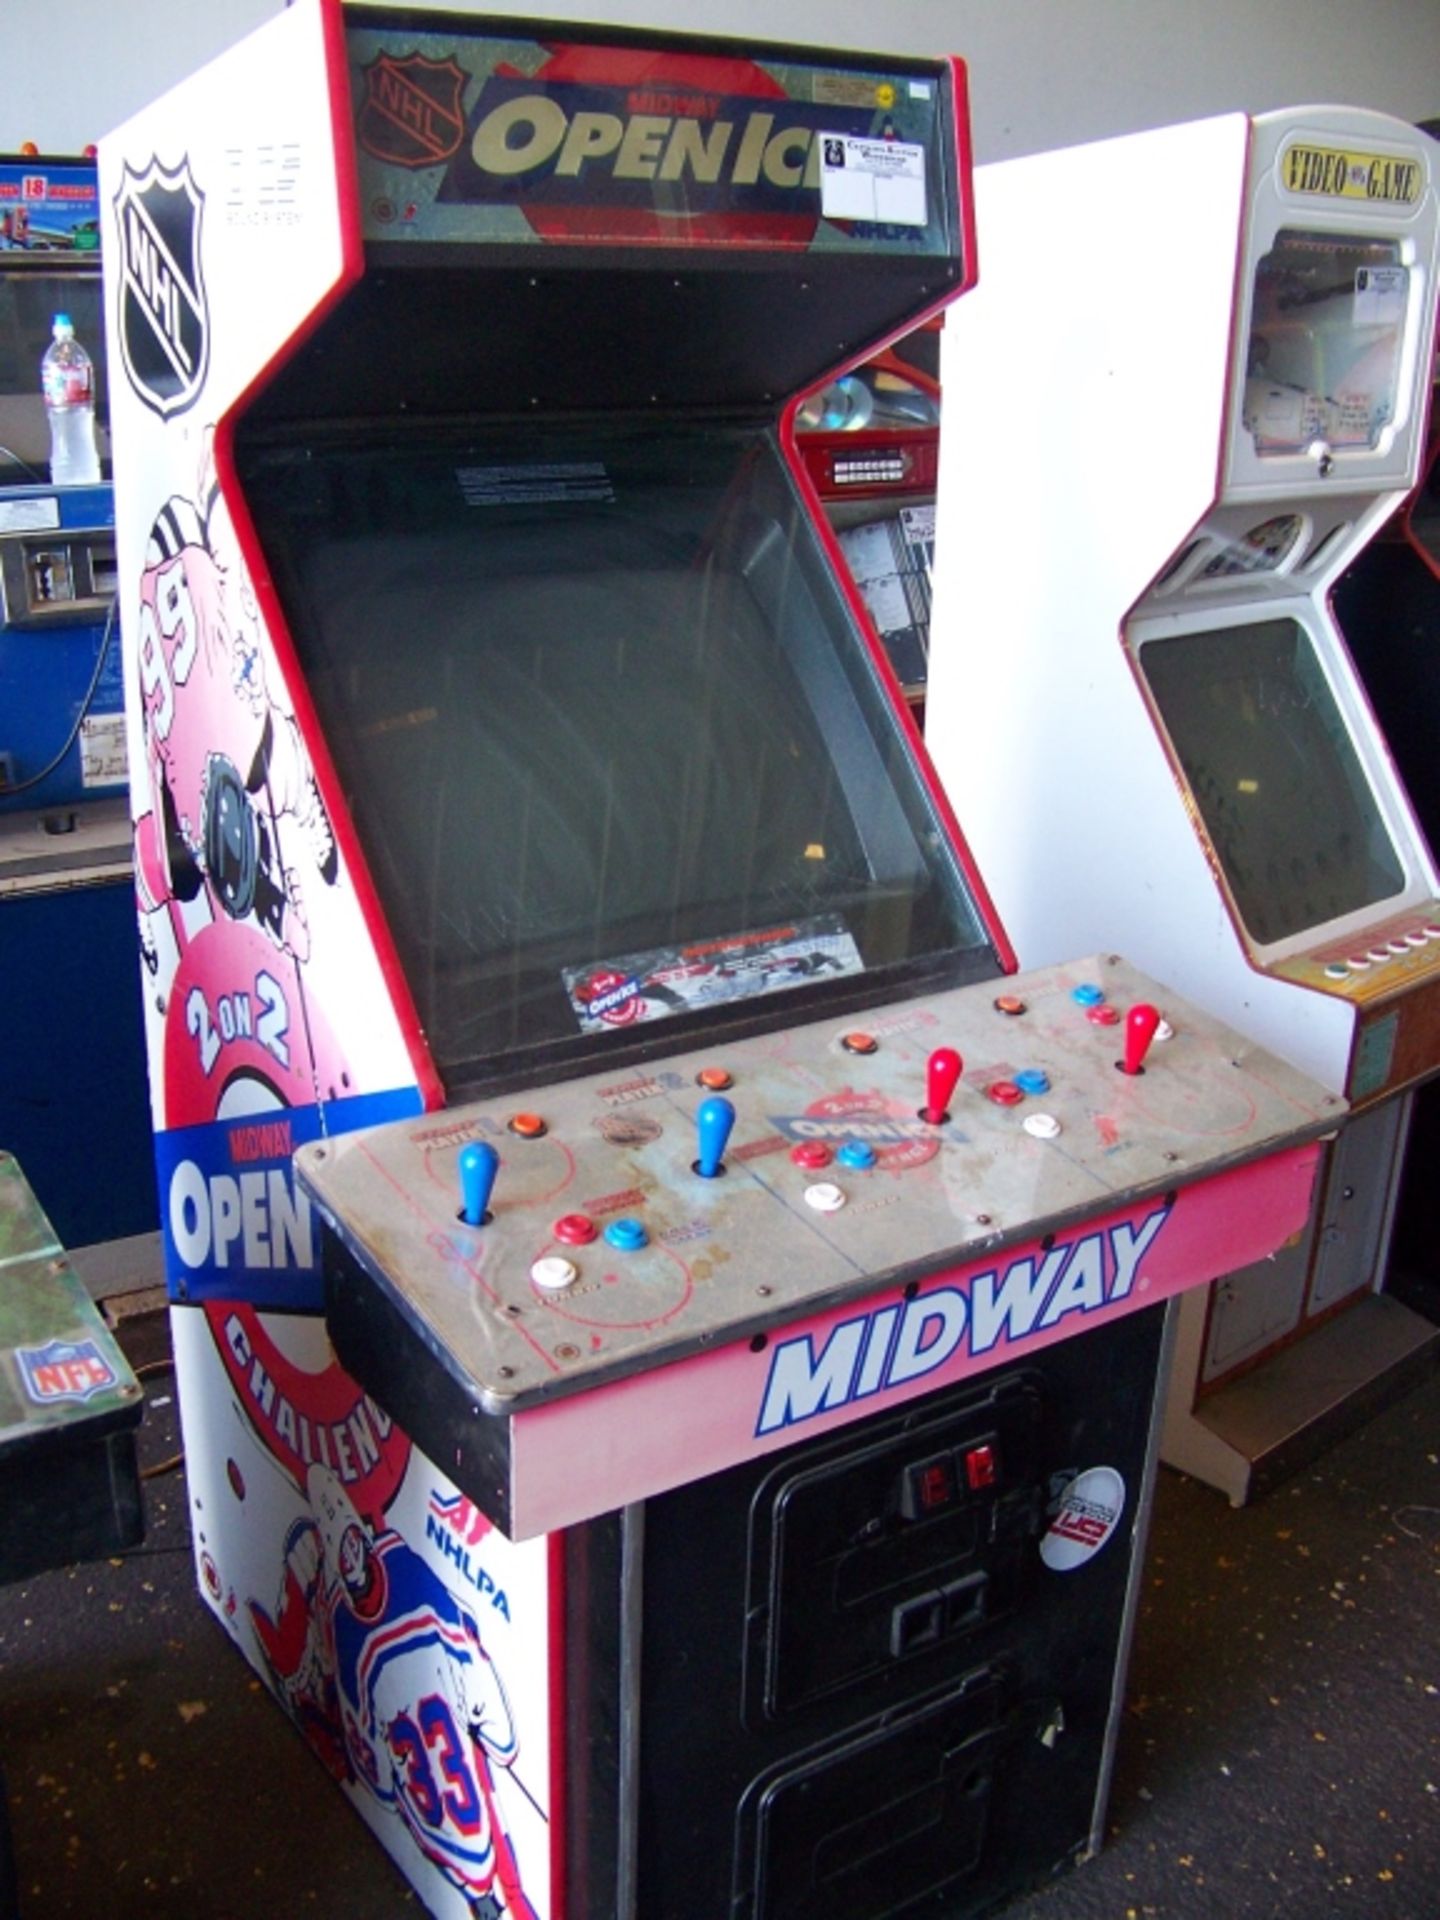 OPEN ICE HOCKEY ARCADE GAME MIDWAY Item is in used condition. Evidence of wear and commercial